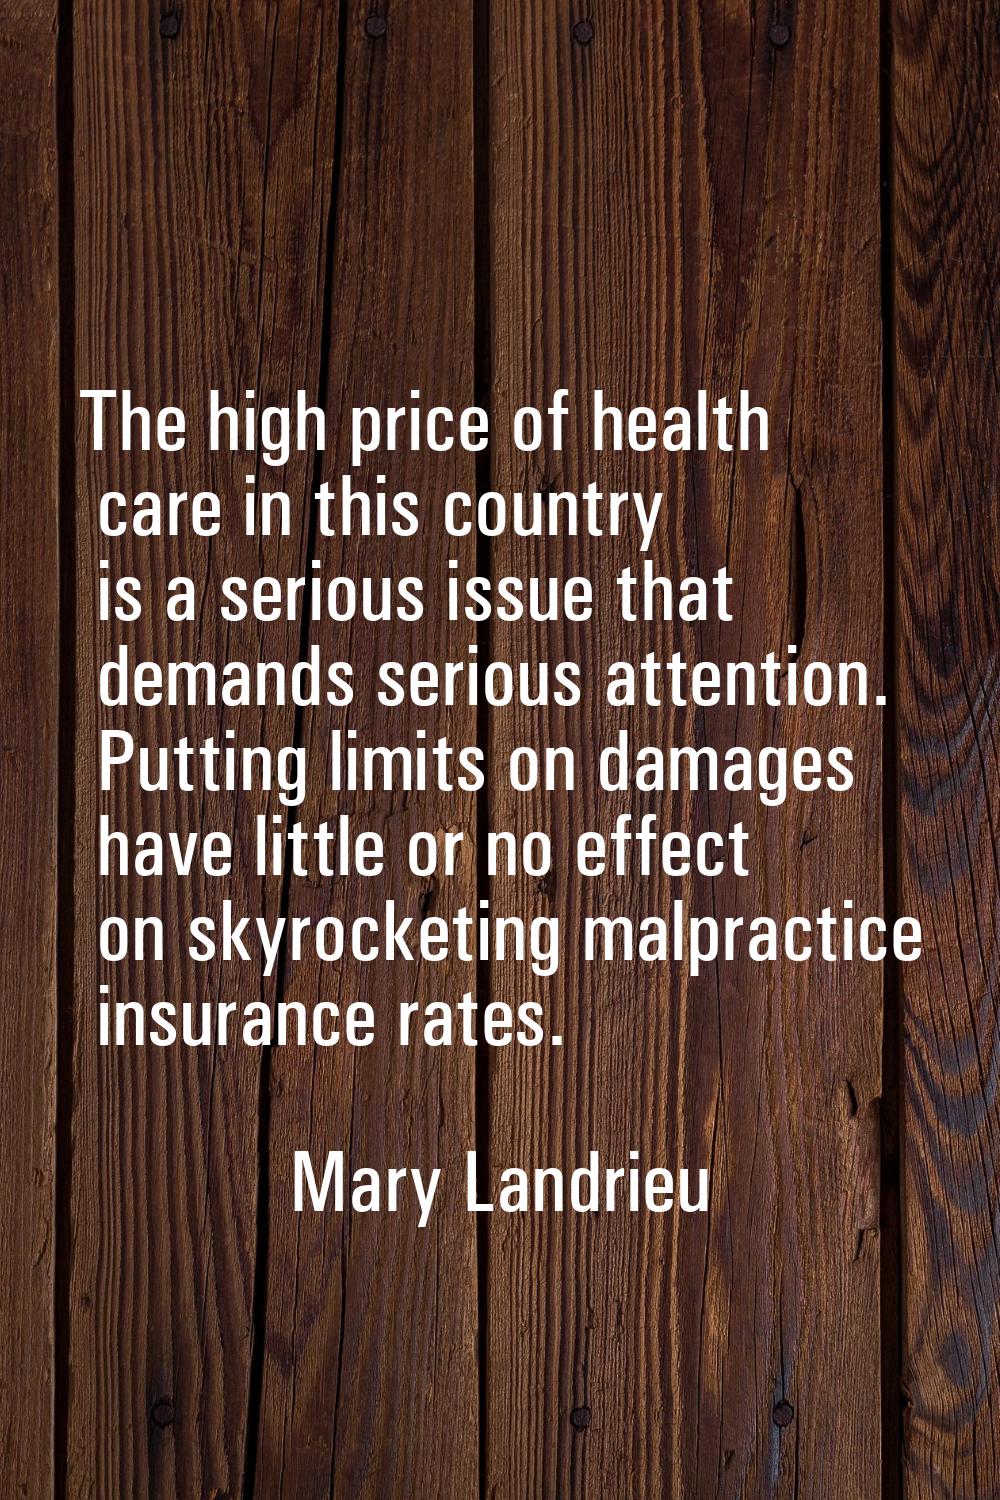 The high price of health care in this country is a serious issue that demands serious attention. Pu